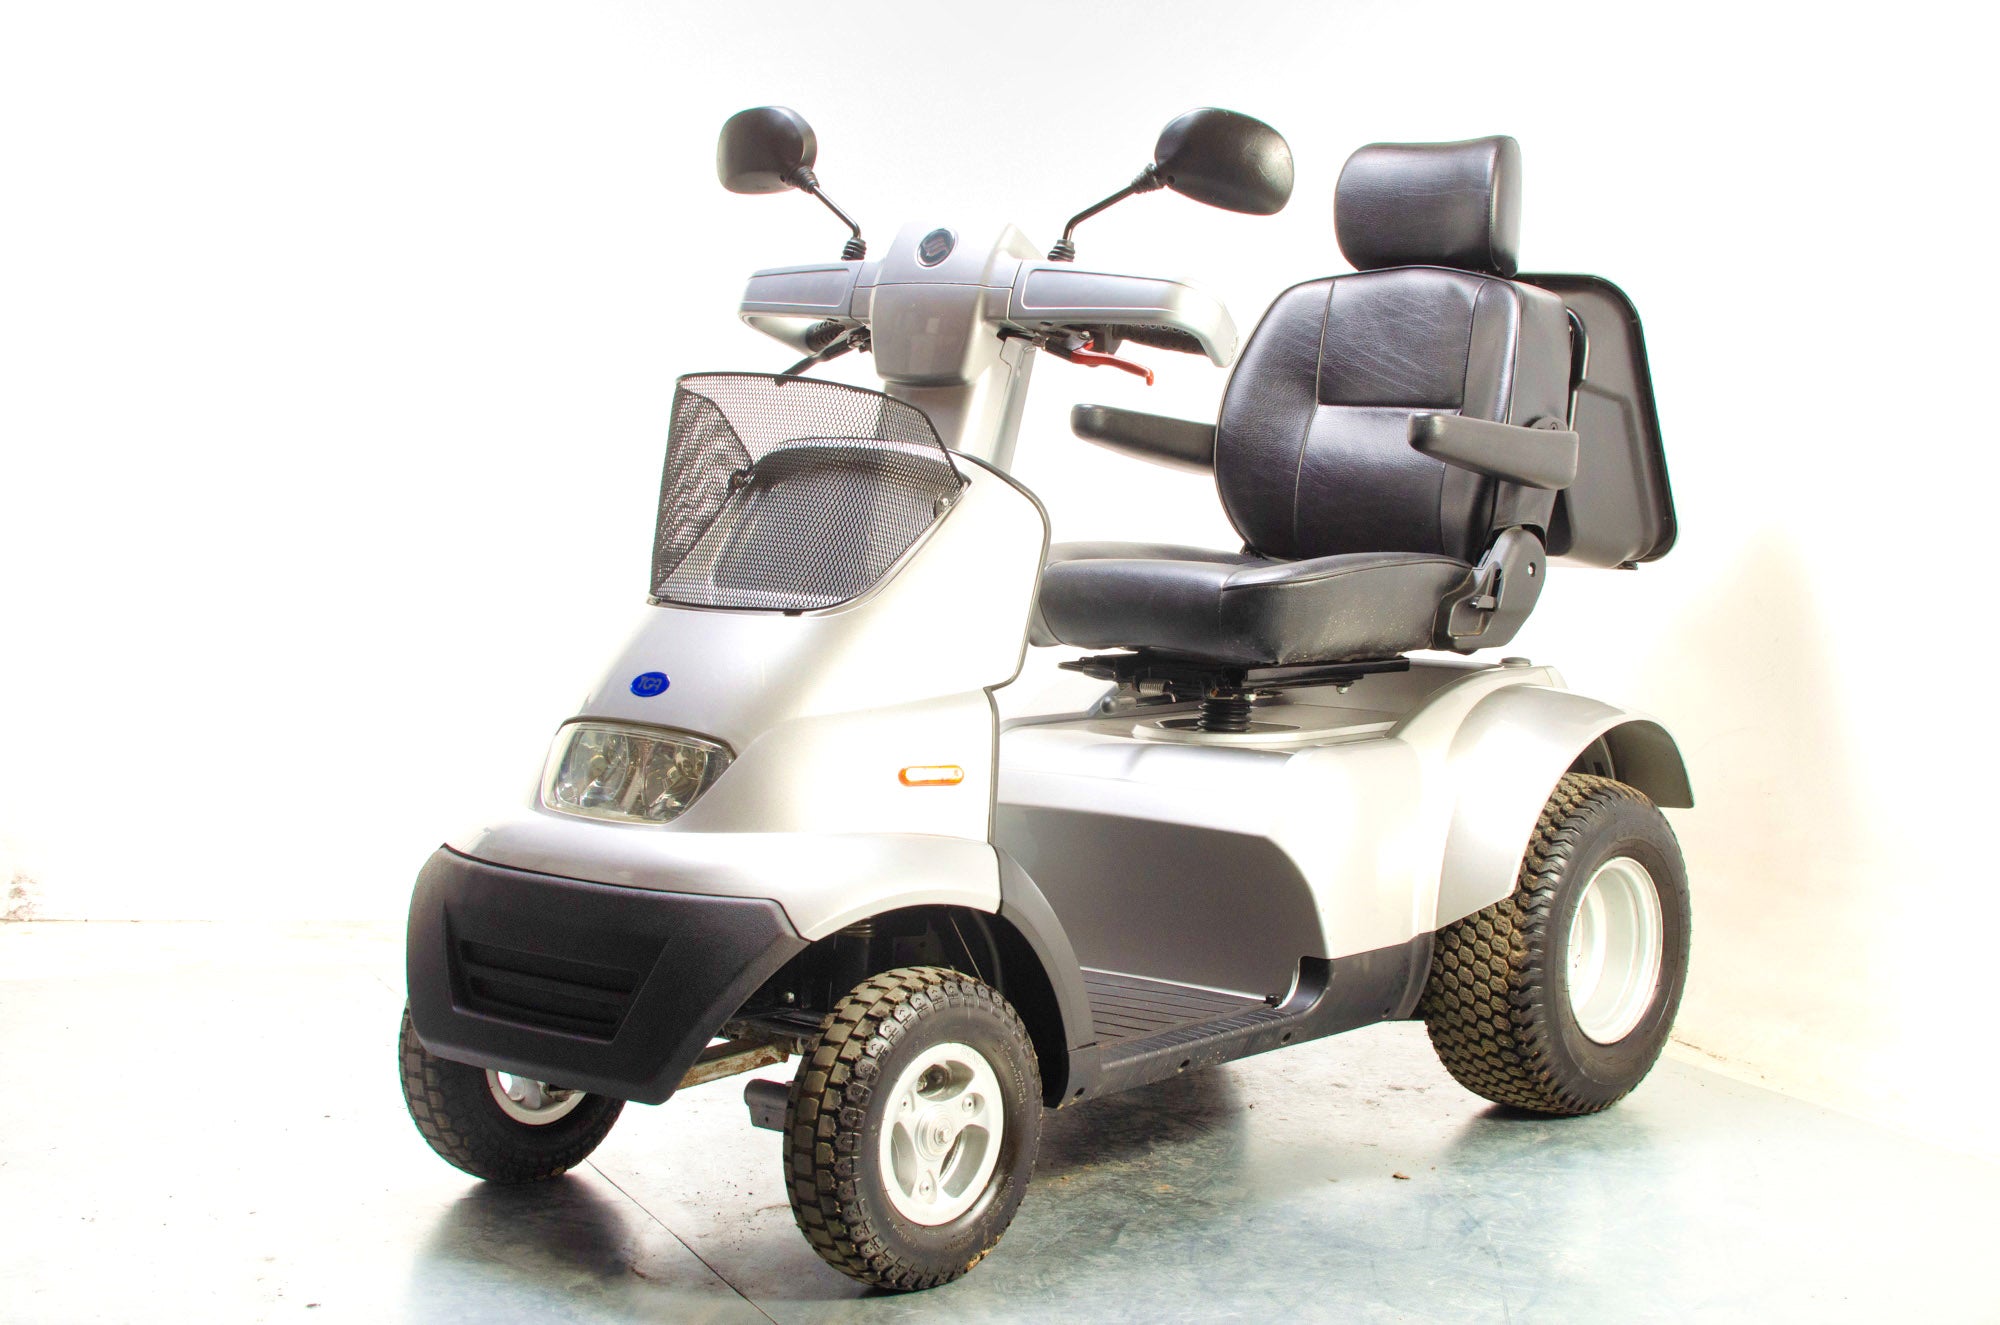 TGA Breeze S4 GT Electric Mobility Scooter Used 8mph All-Terrain Large